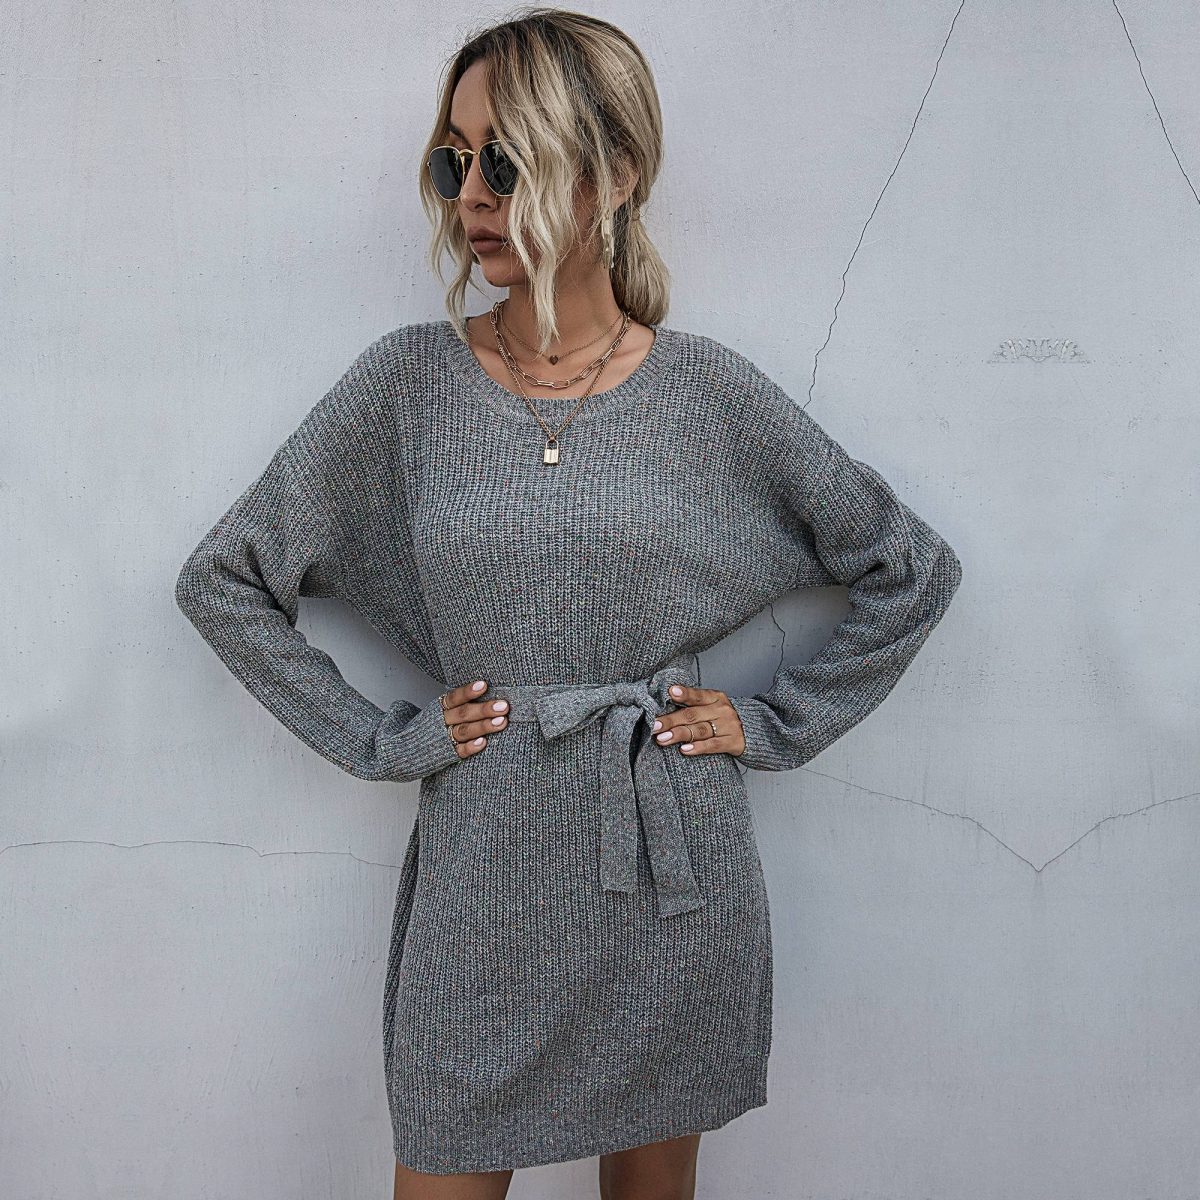 Gray o-neck ribbed long sleeve with belt loose sweater dress